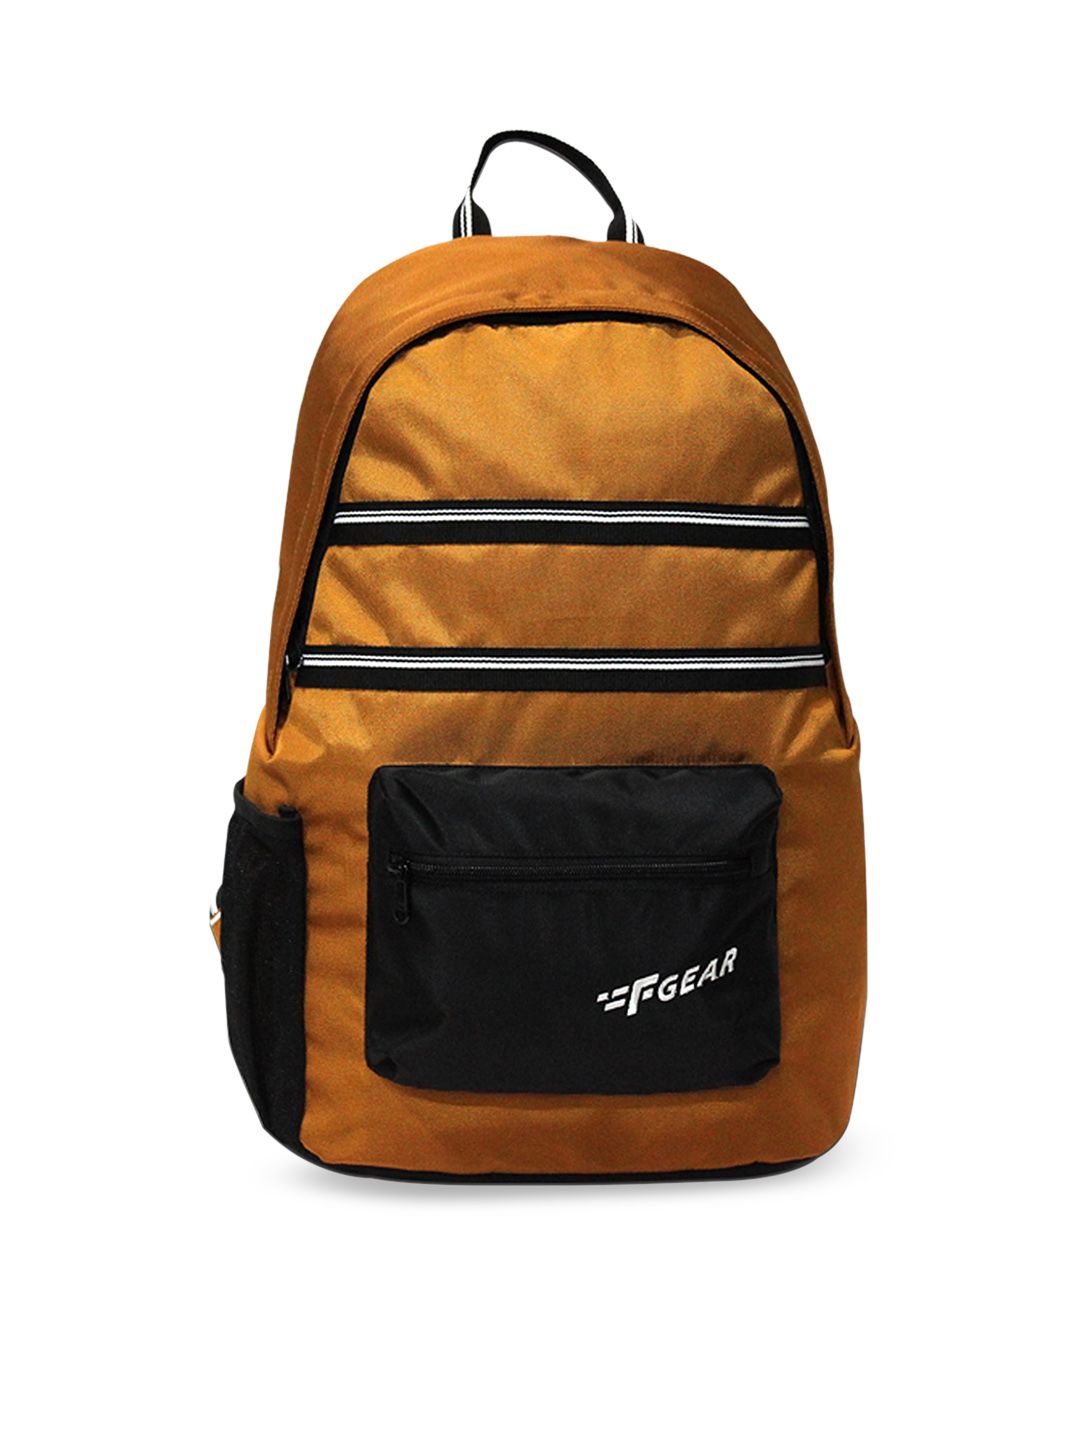 F Gear Unisex Mustard & Black Solid Backpack Price in India